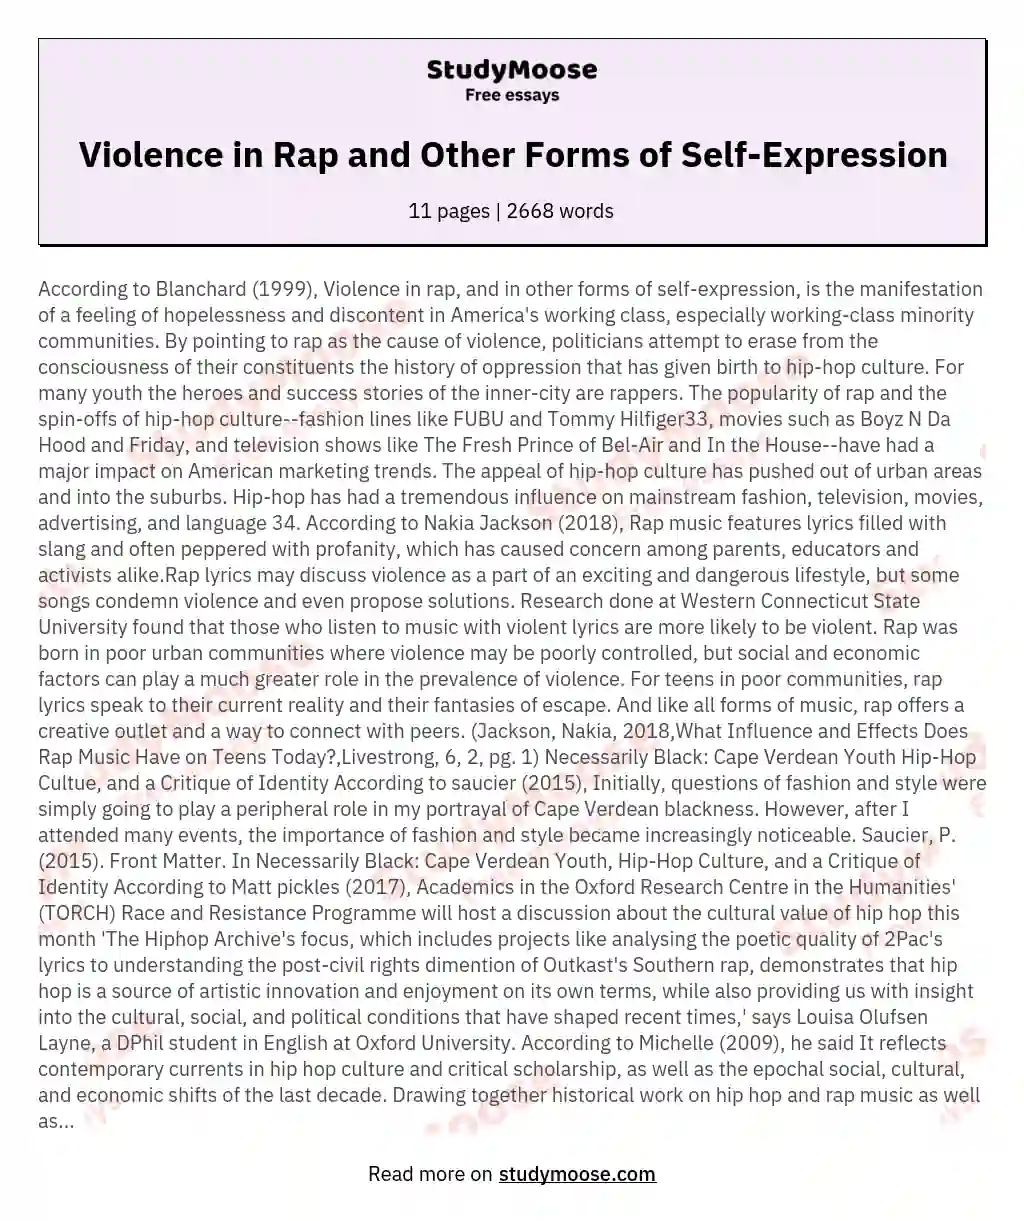 Violence in Rap and Other Forms of Self-Expression